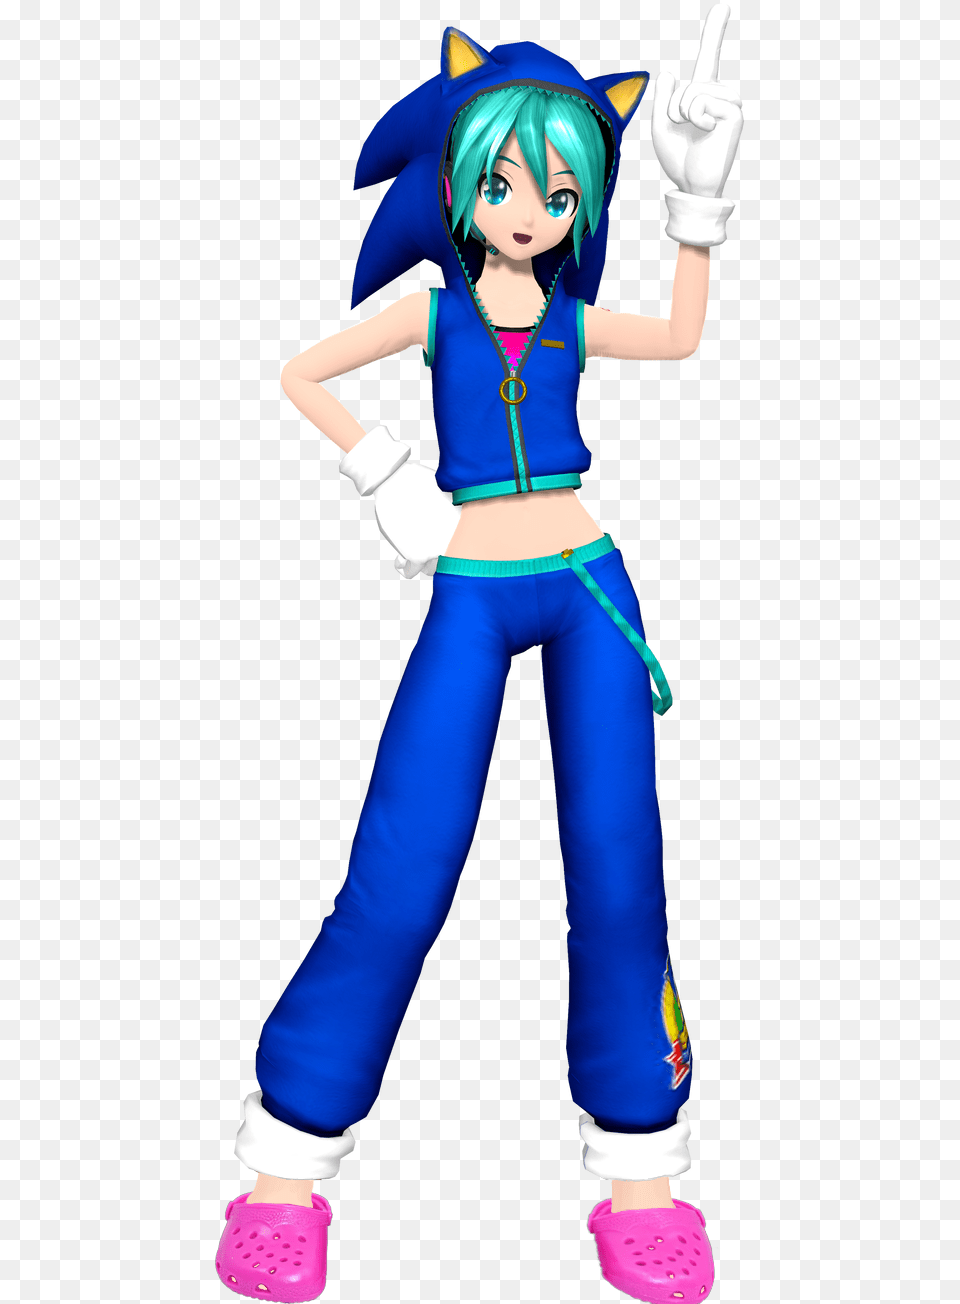 Hatsune Miku Shouldnt Be Wearing Pink Crocs With Her Project Diva Miku Sonic, Book, Clothing, Comics, Costume Png